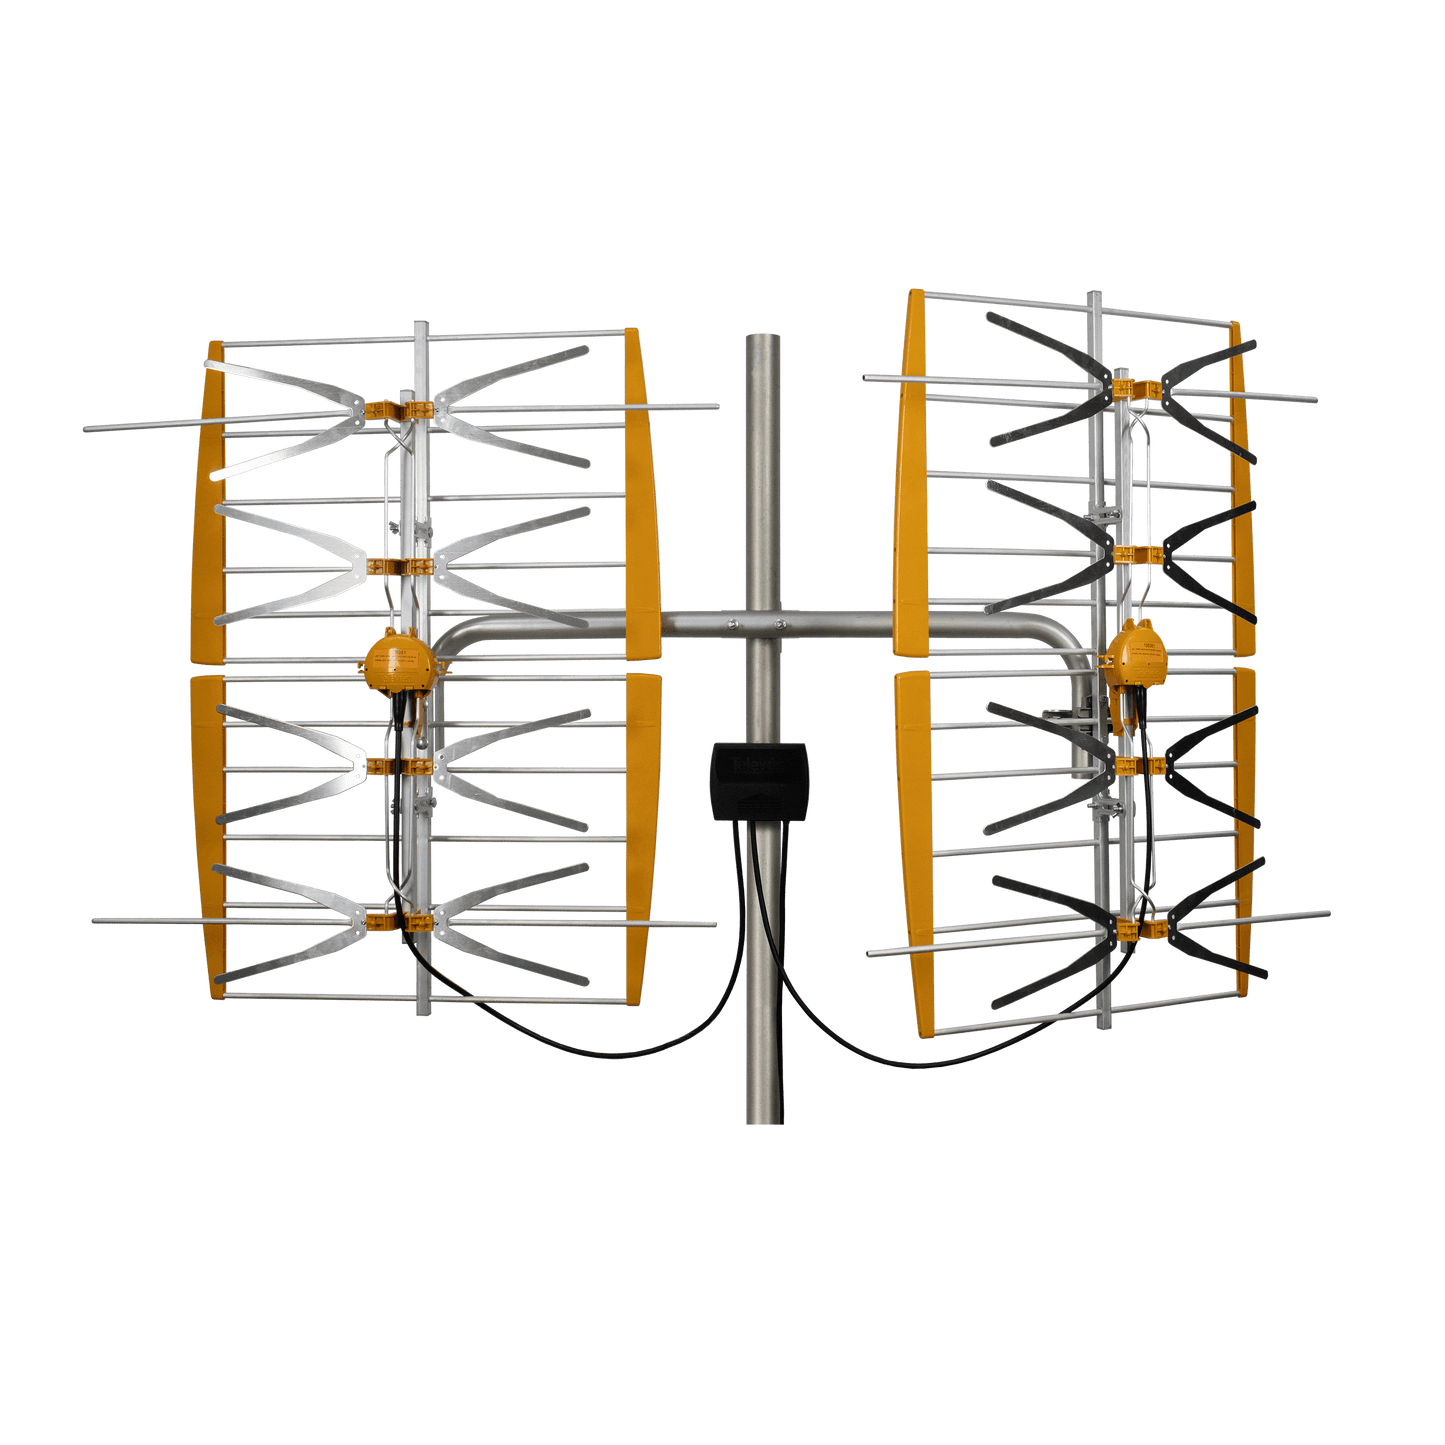 Televes 108381, 8 Bay Dipole Array Powered Antenna, hi-VHF/UHF, 5G/LTE Filtered, Multi-directional Dual Market